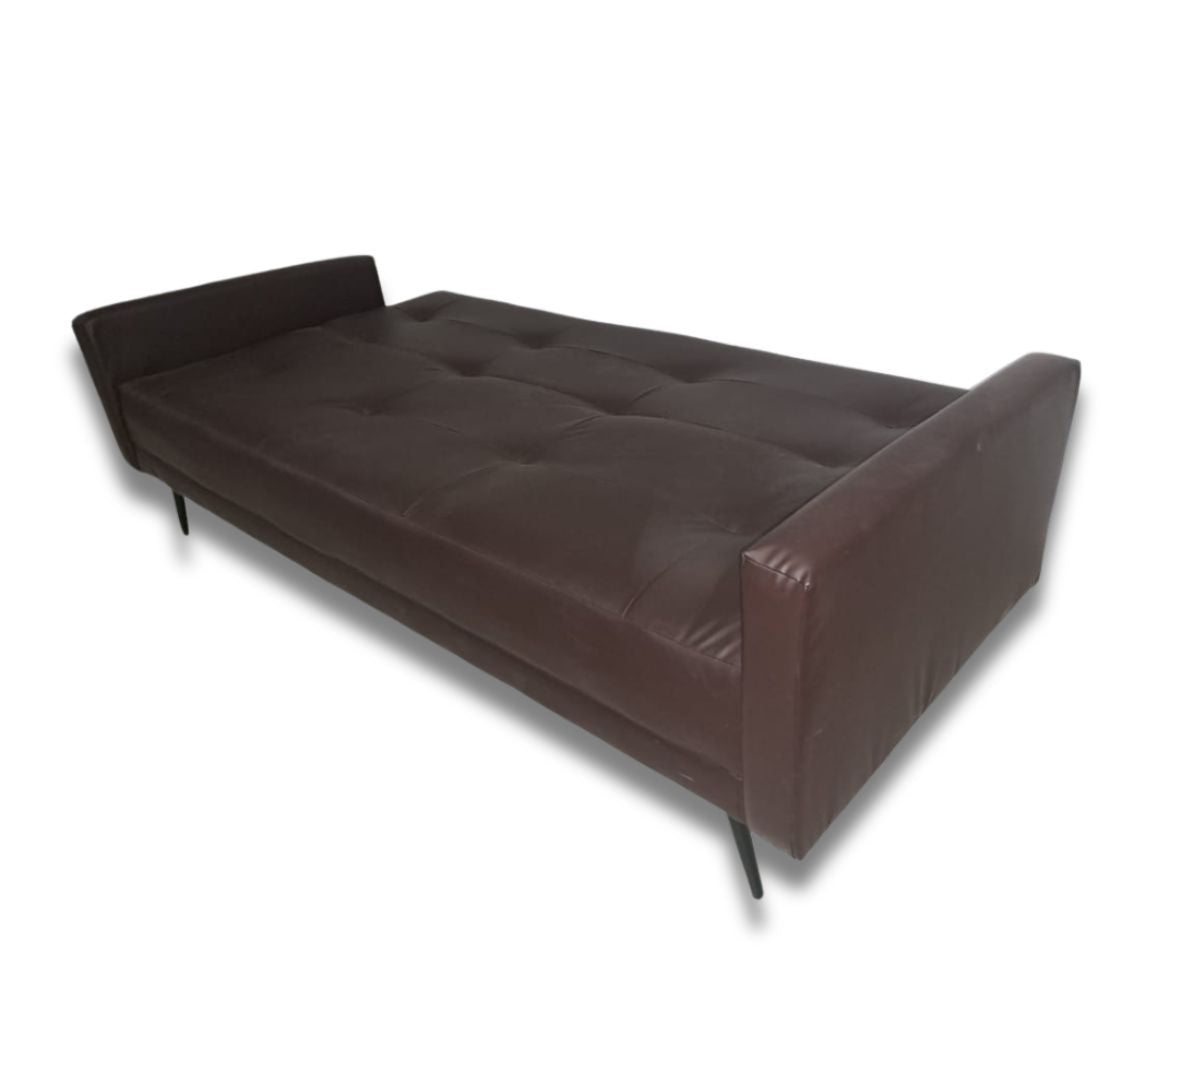 3 Seater Sleeper Couch - That Couch Place